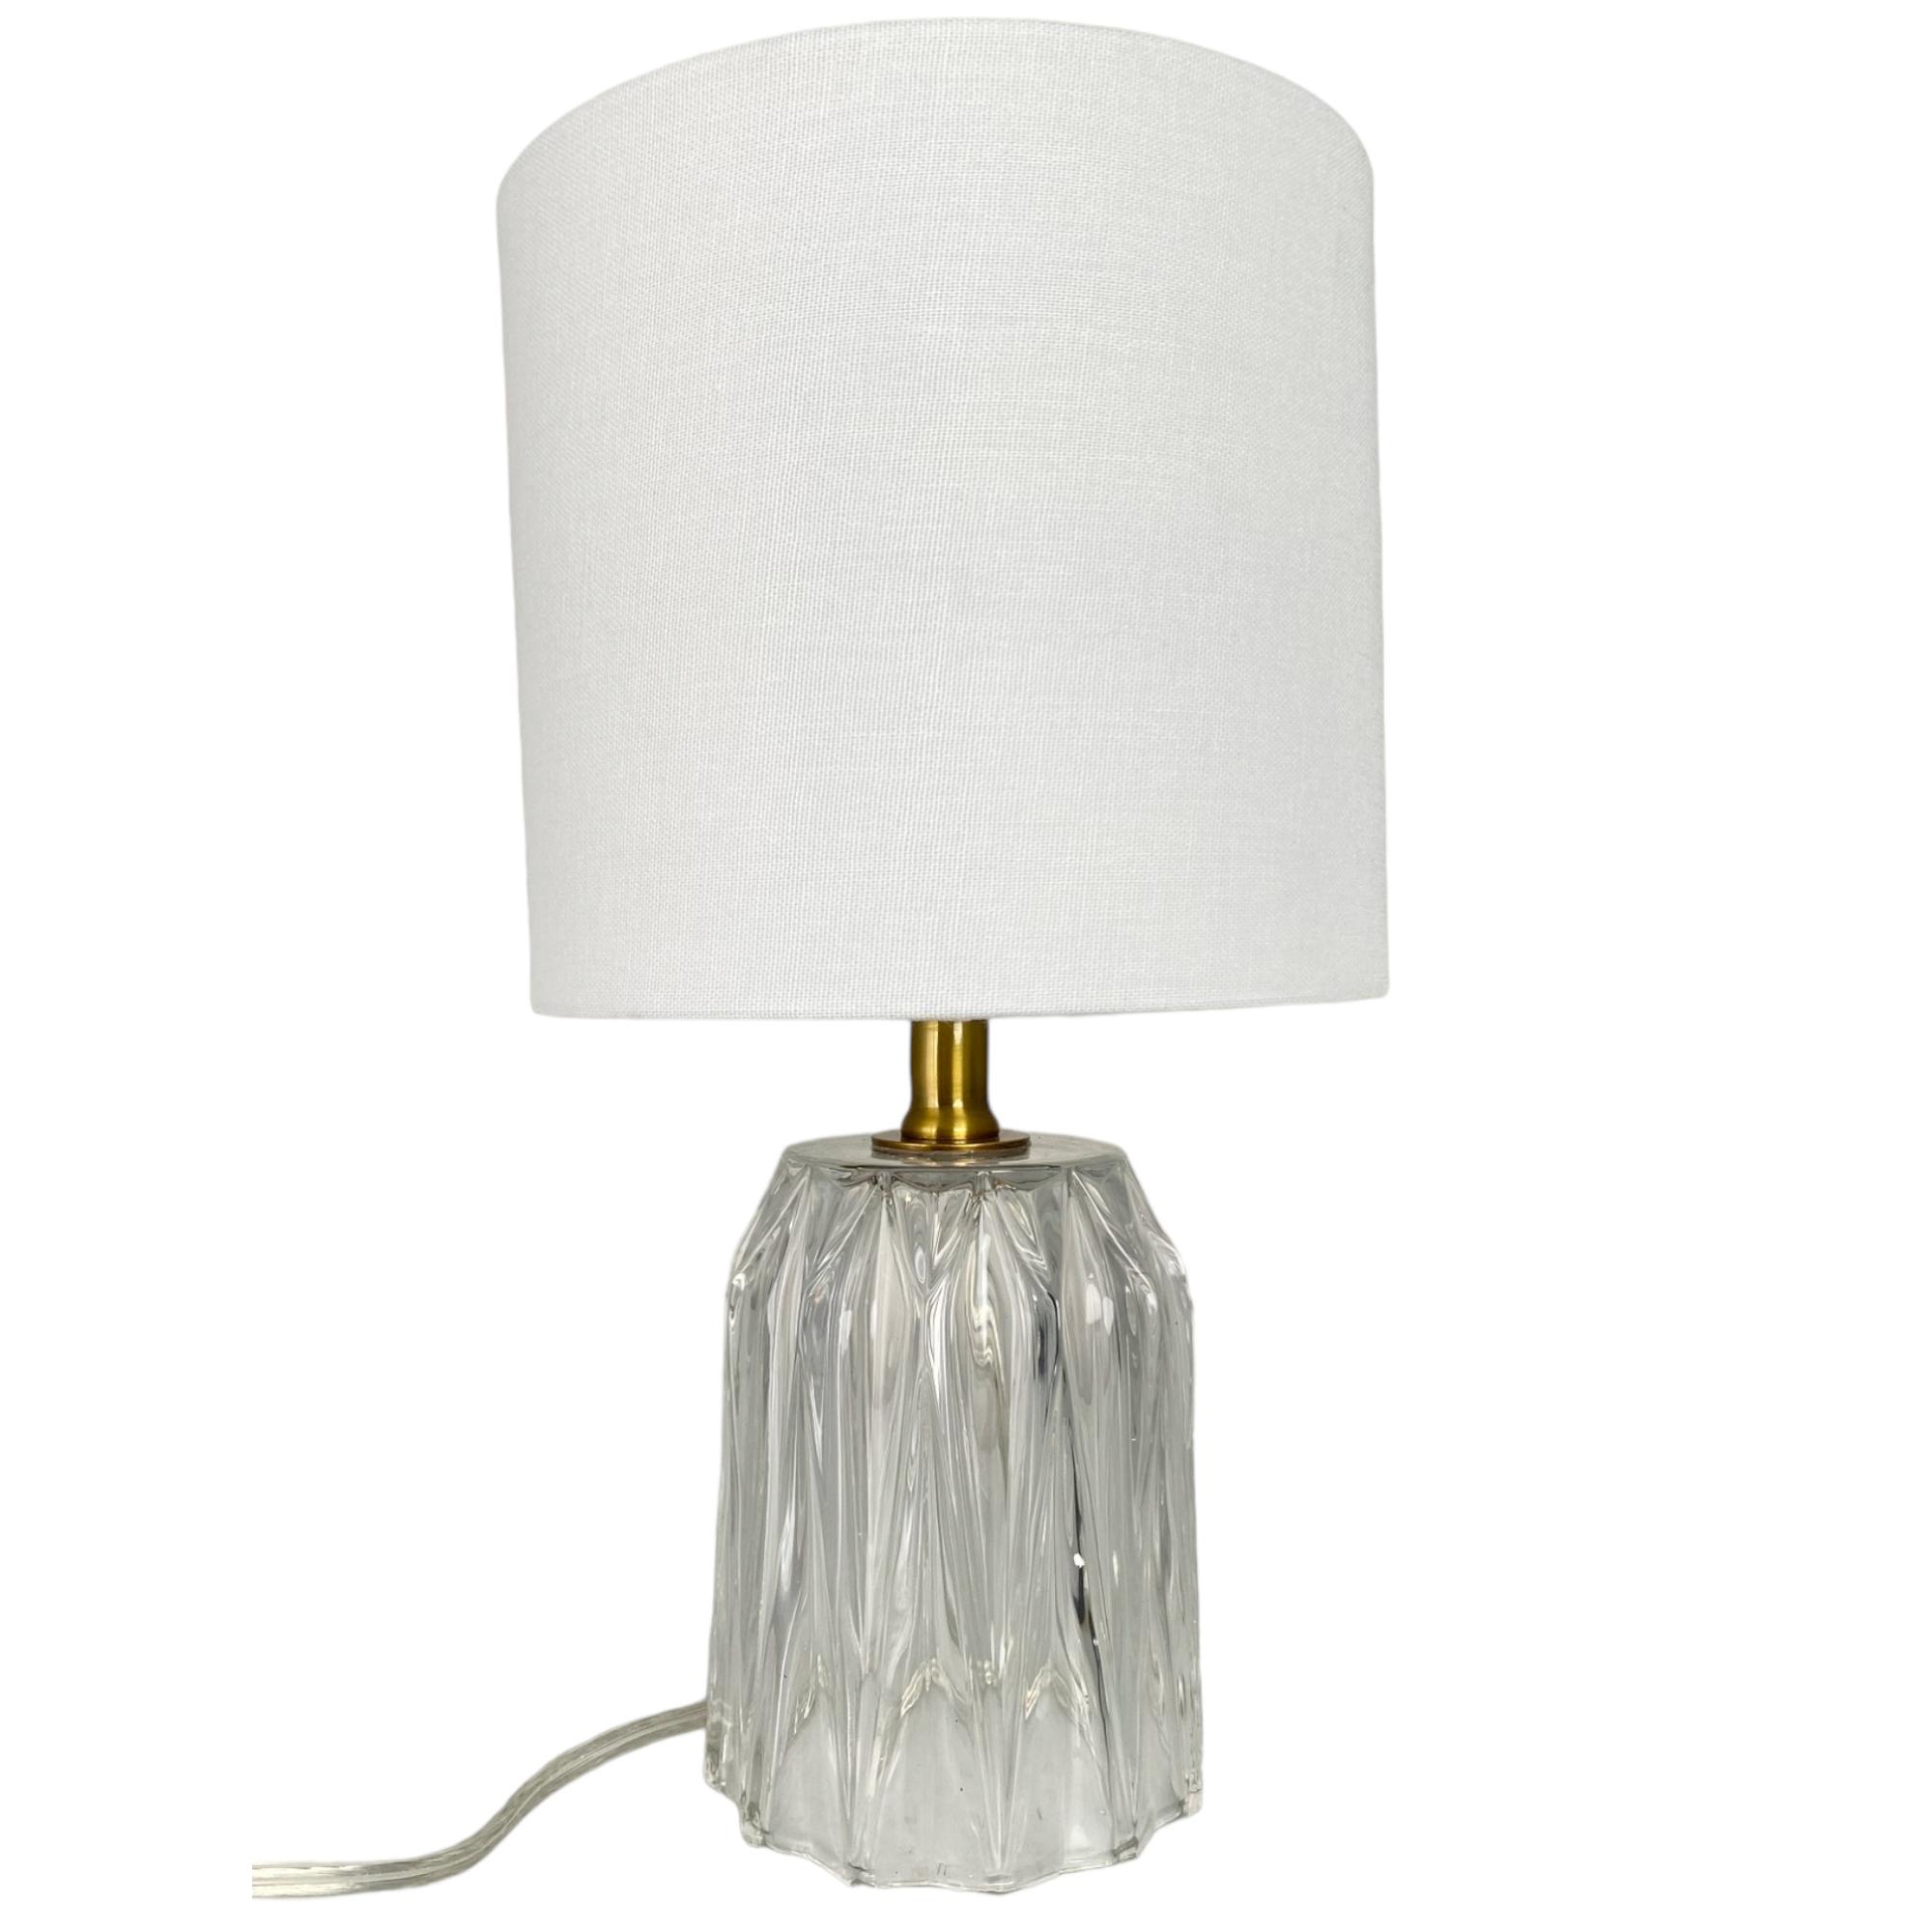 TABLE LAMP - 541-780038/1